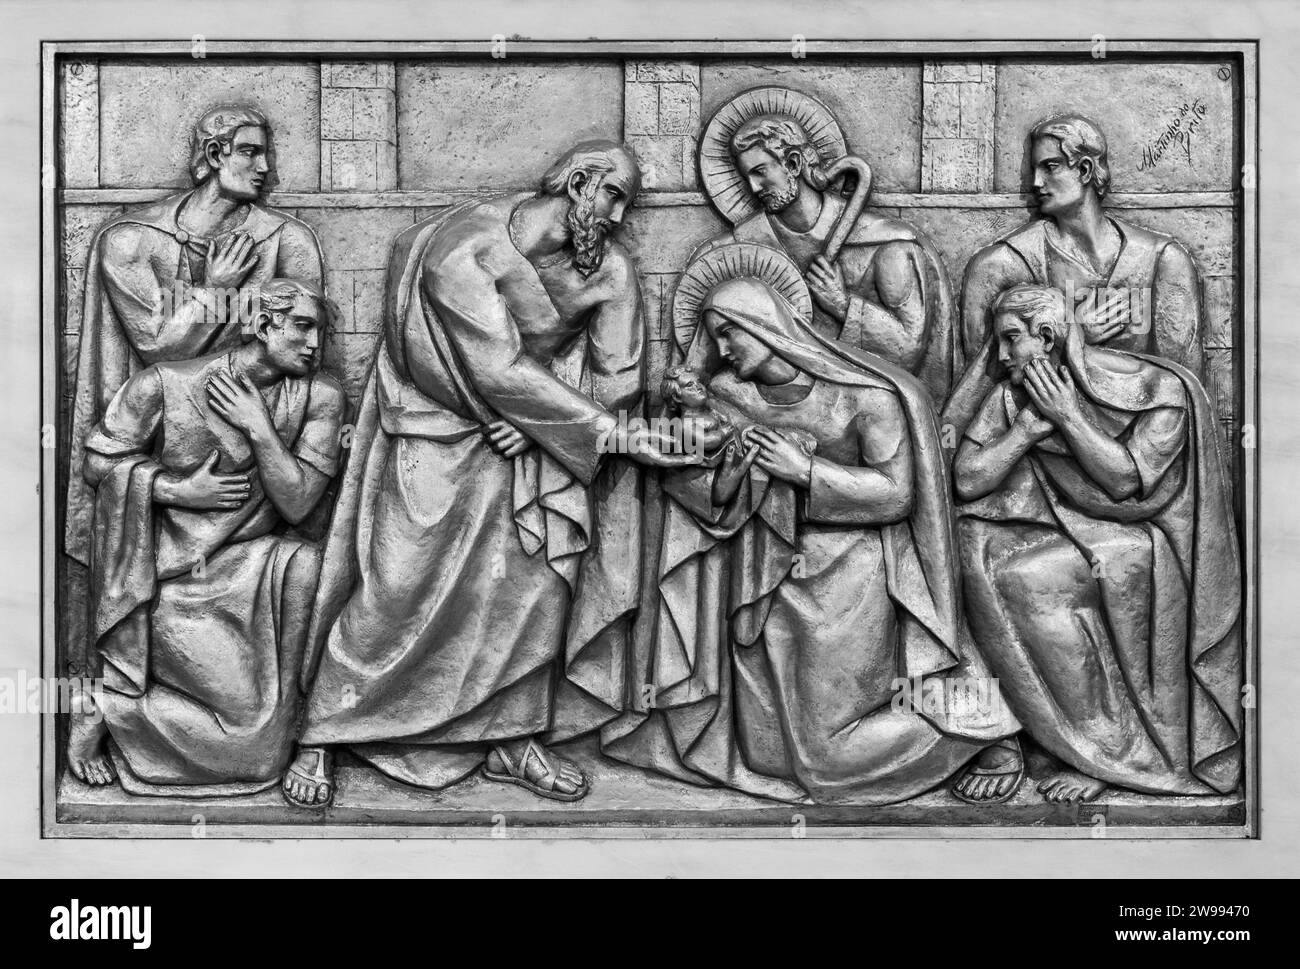 The Presentation of Jesus in the Temple – Fourth Joyful Mystery. A relief sculpture in the Basilica of Our Lady of the Rosary of Fatima. Stock Photo